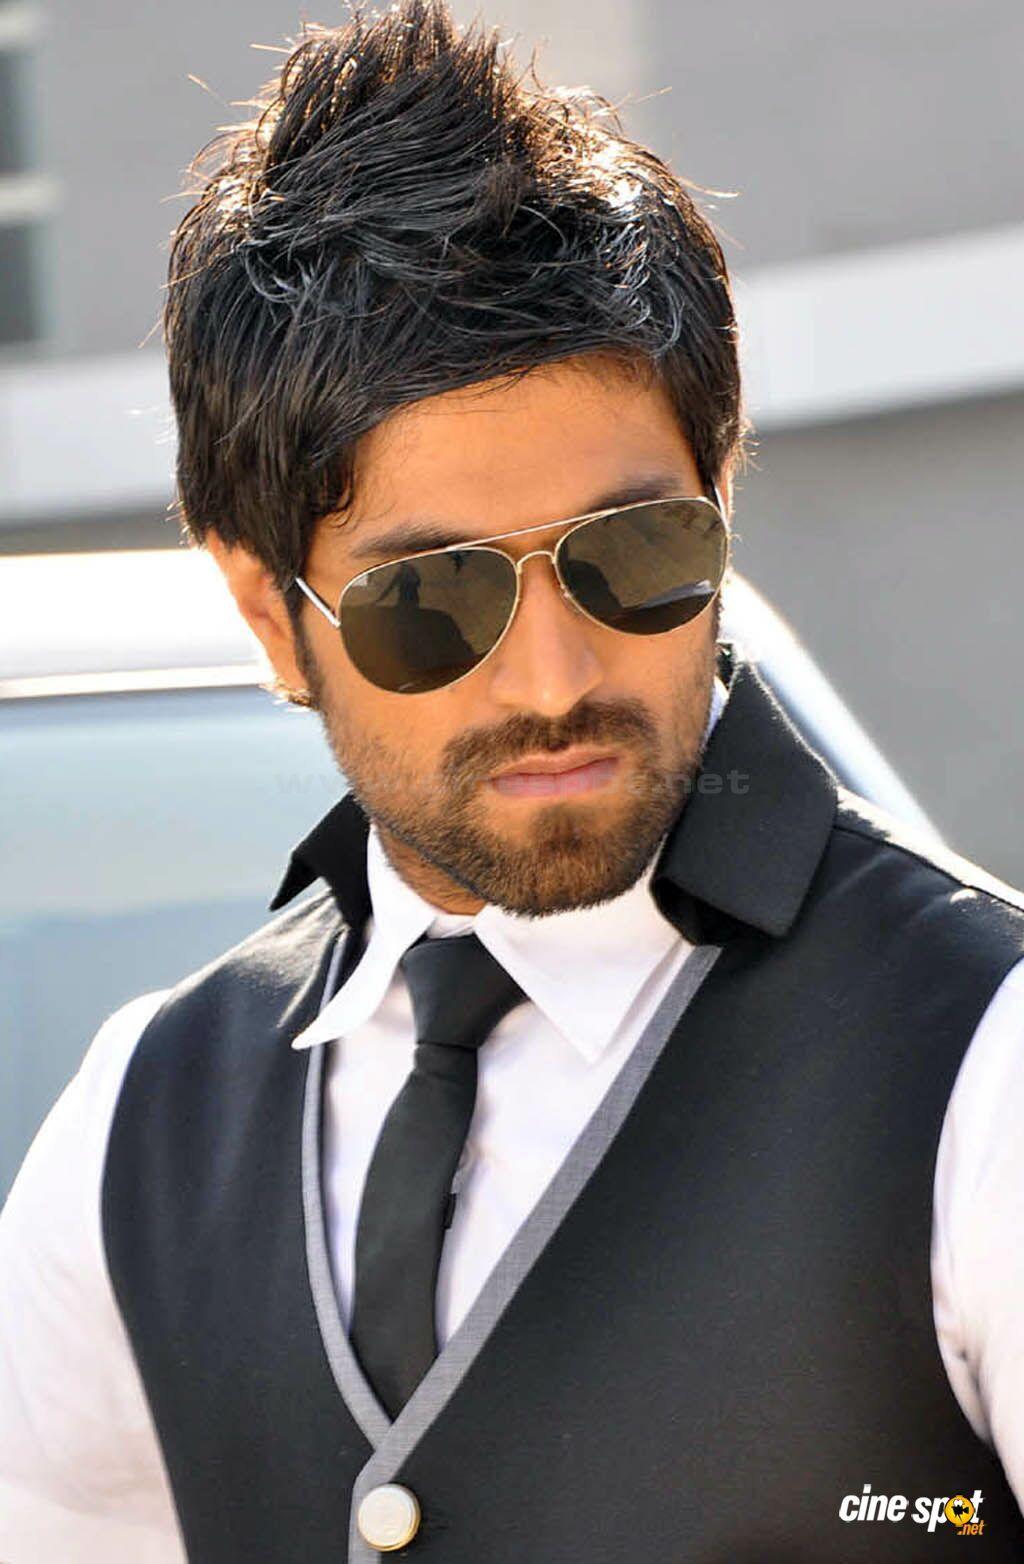 Yash Kannada Film Actor Hot And Beautiful Wallpaper Free. Actor picture, Actor photo, Actors